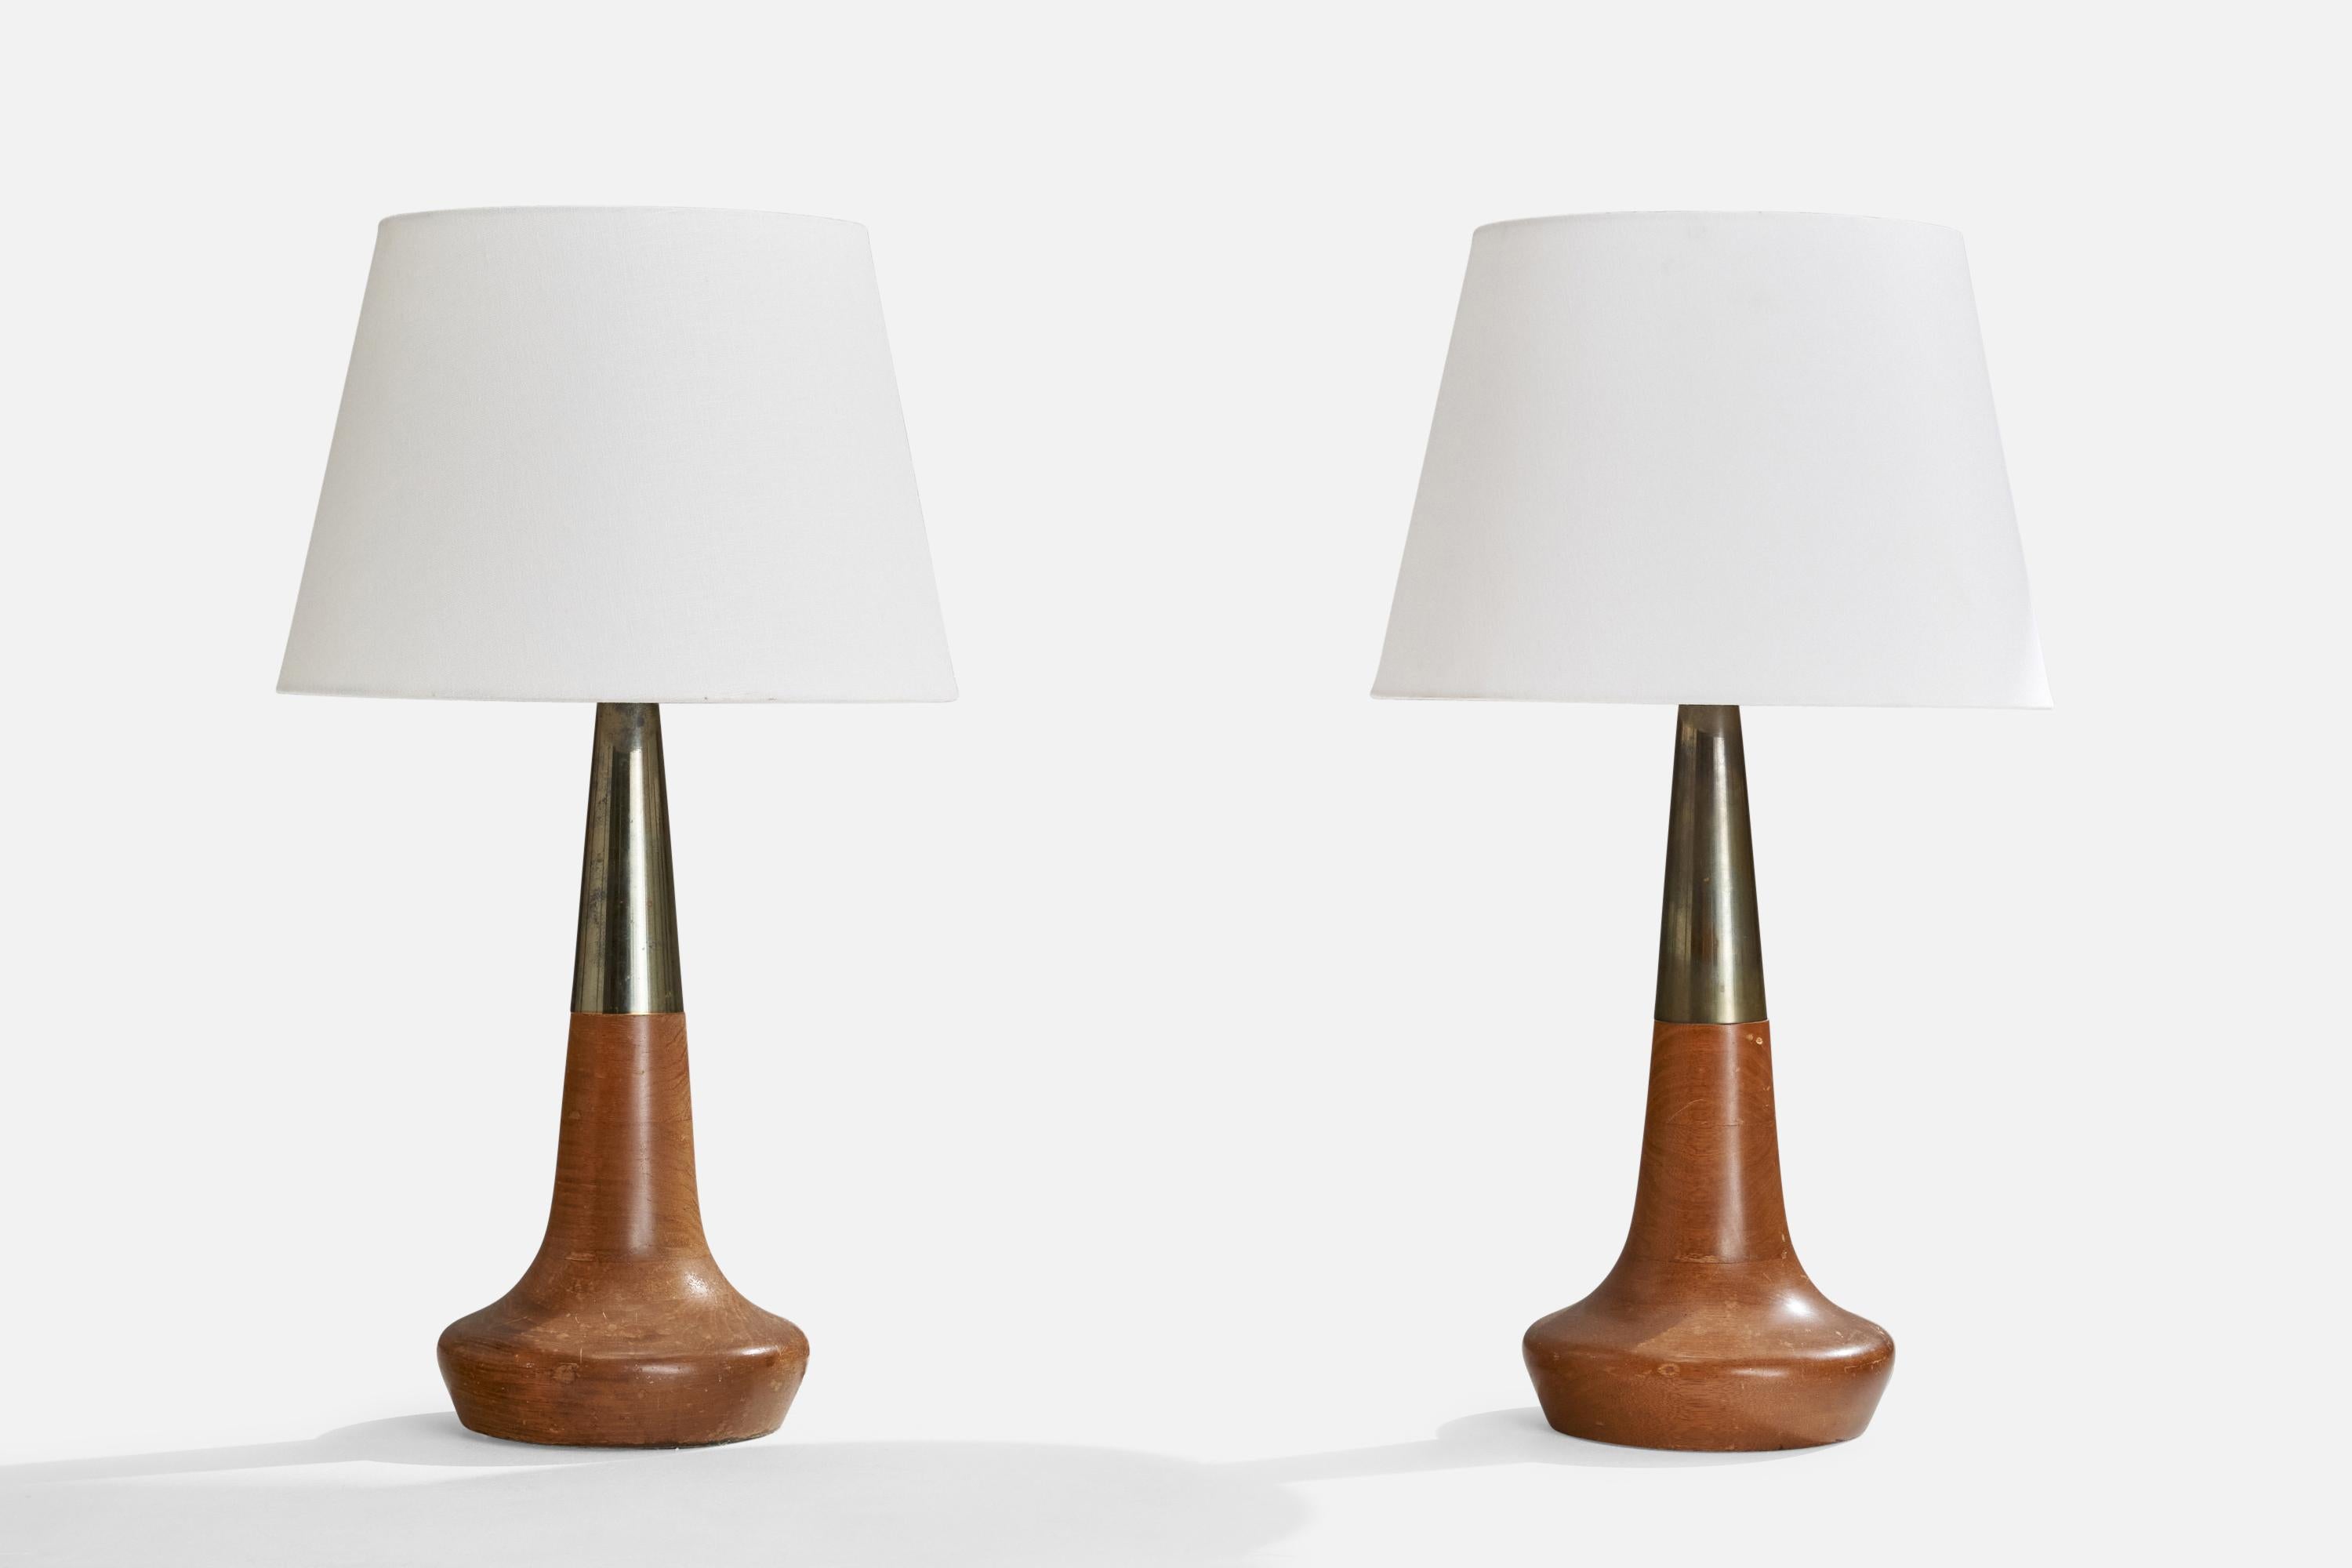 A pair of walnut and brass table lamps designed and produced in the US, c. 1950s.

With glass diffusers.

Overall Dimensions (inches): 25” H x 14” W x 15” D
Stated dimensions include shade.
Bulb Specifications: E-26 Bulb
Number of Sockets: 2
All